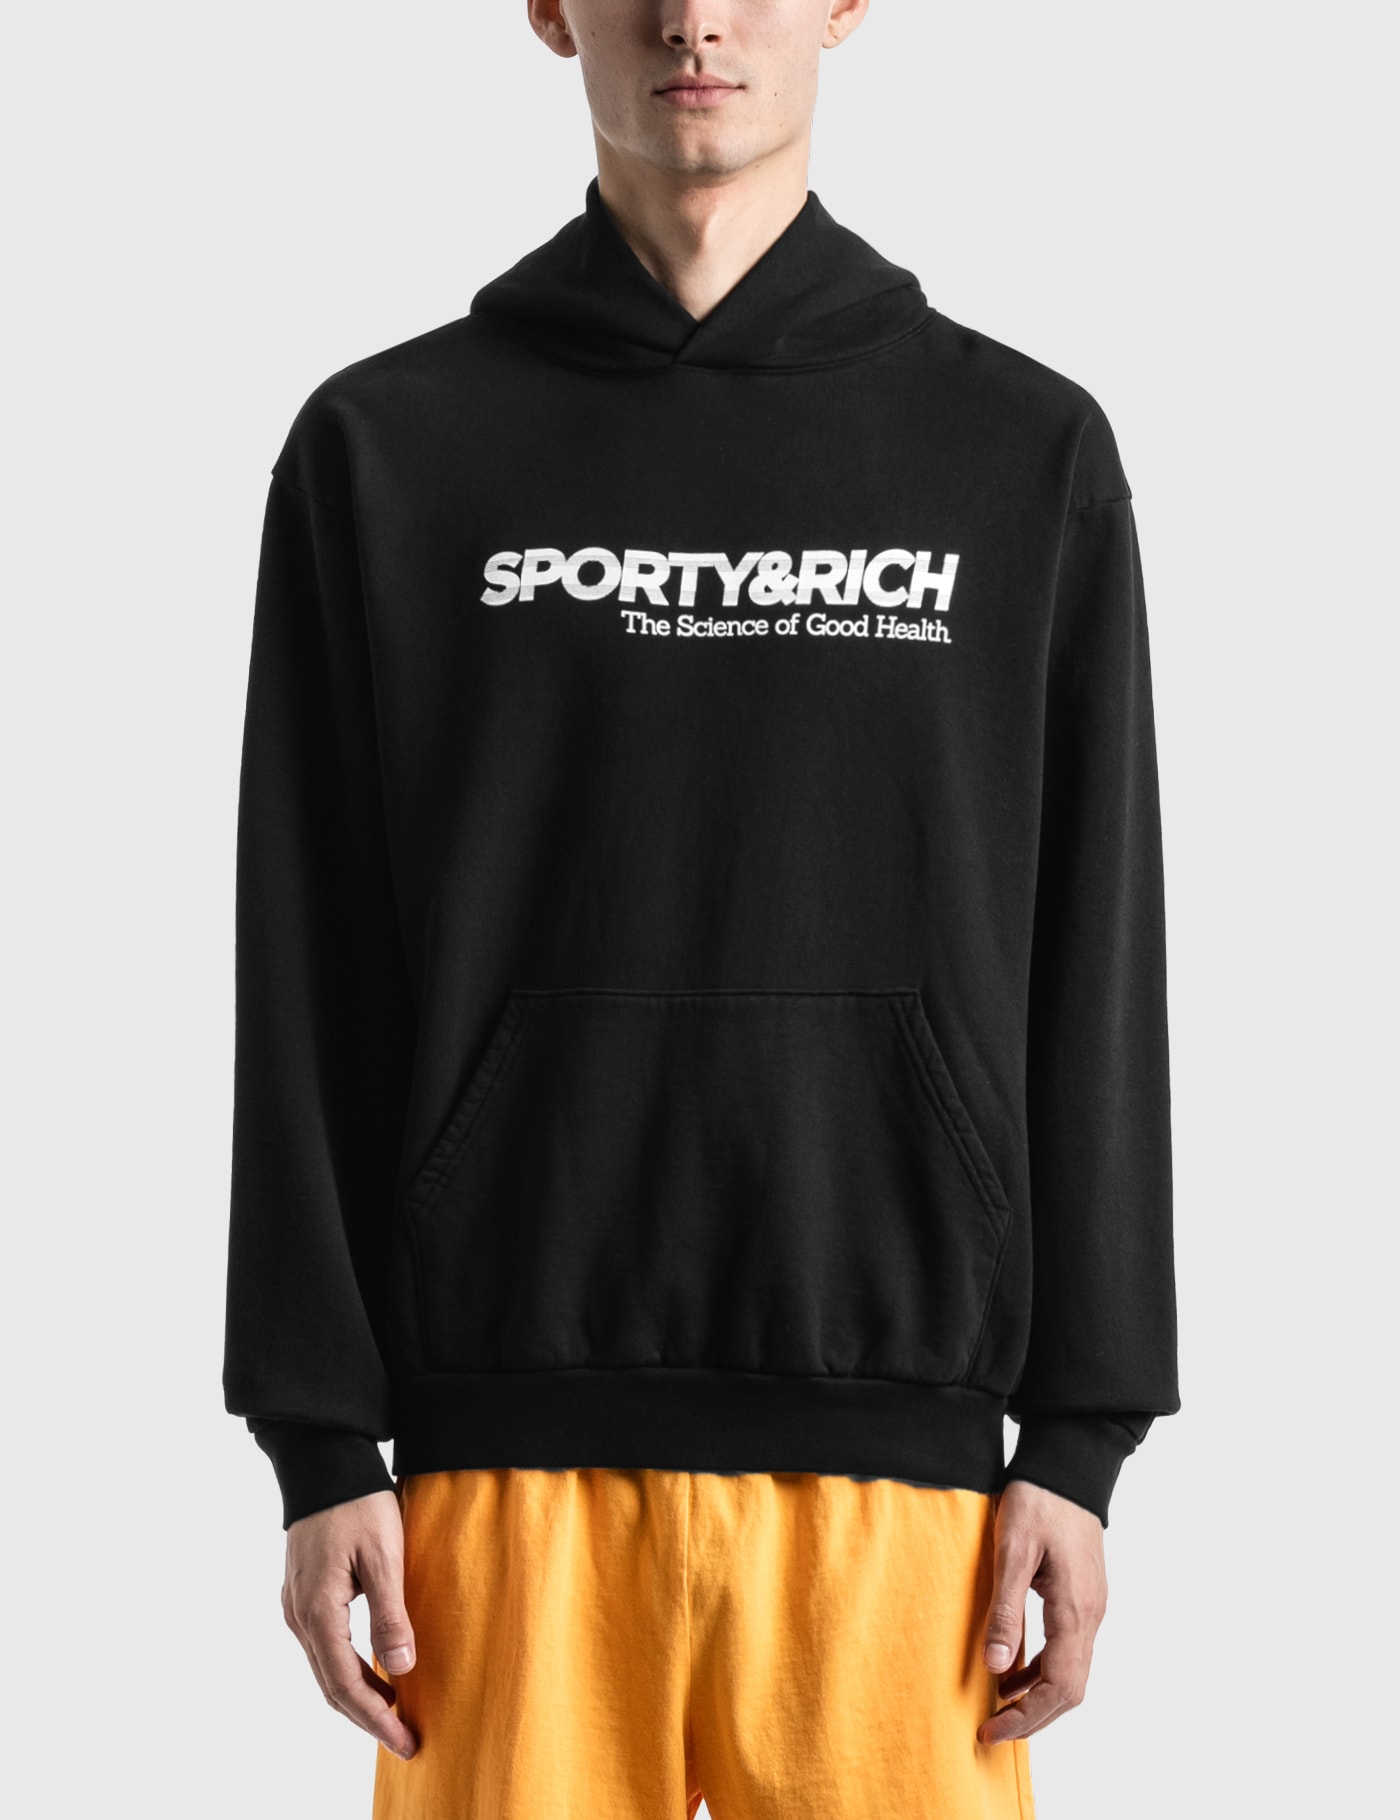 SPORTY AND RICH SCIENCE OF GOOD HEALTH HOODIE